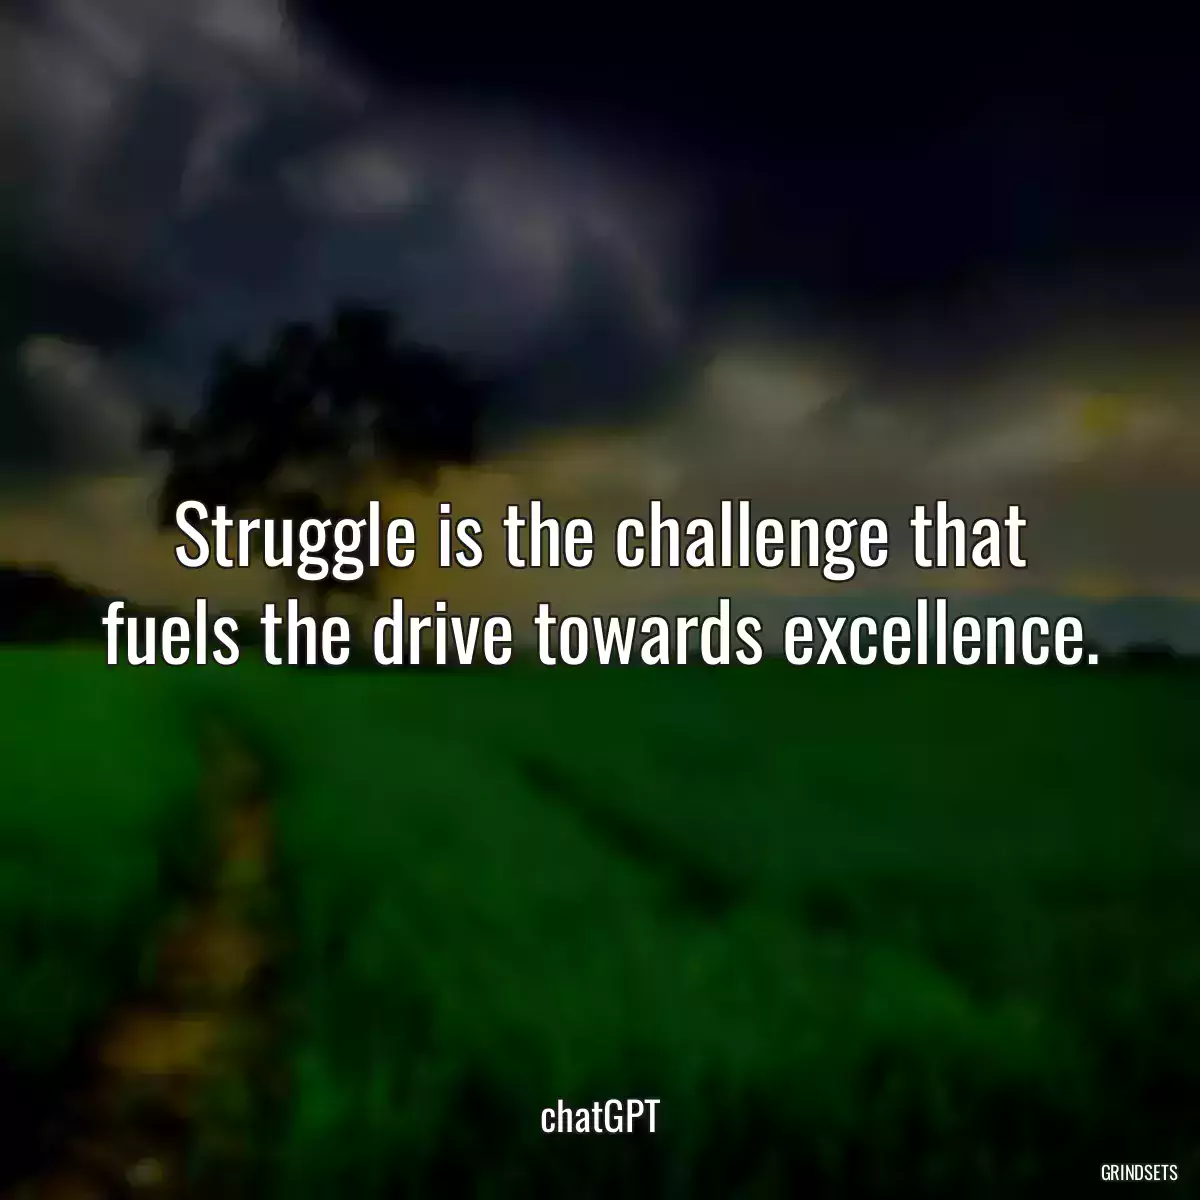 Struggle is the challenge that fuels the drive towards excellence.